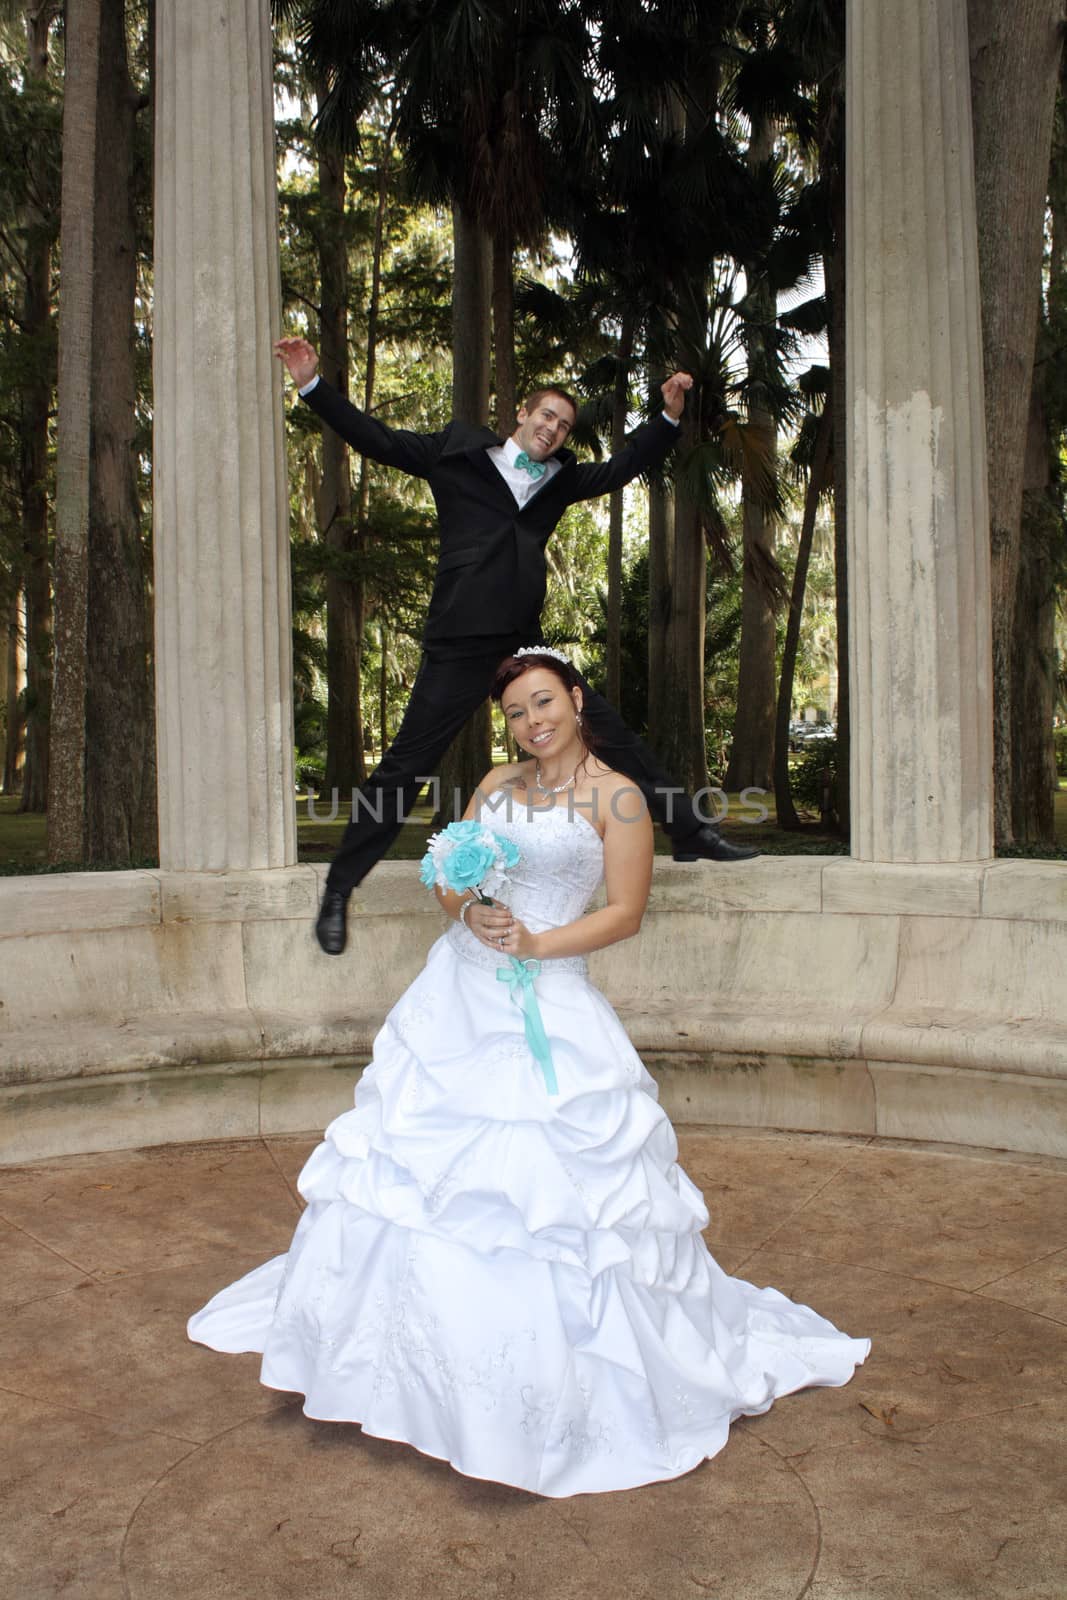 A handsome groom playfully jumps on his bride from behind outdoors.